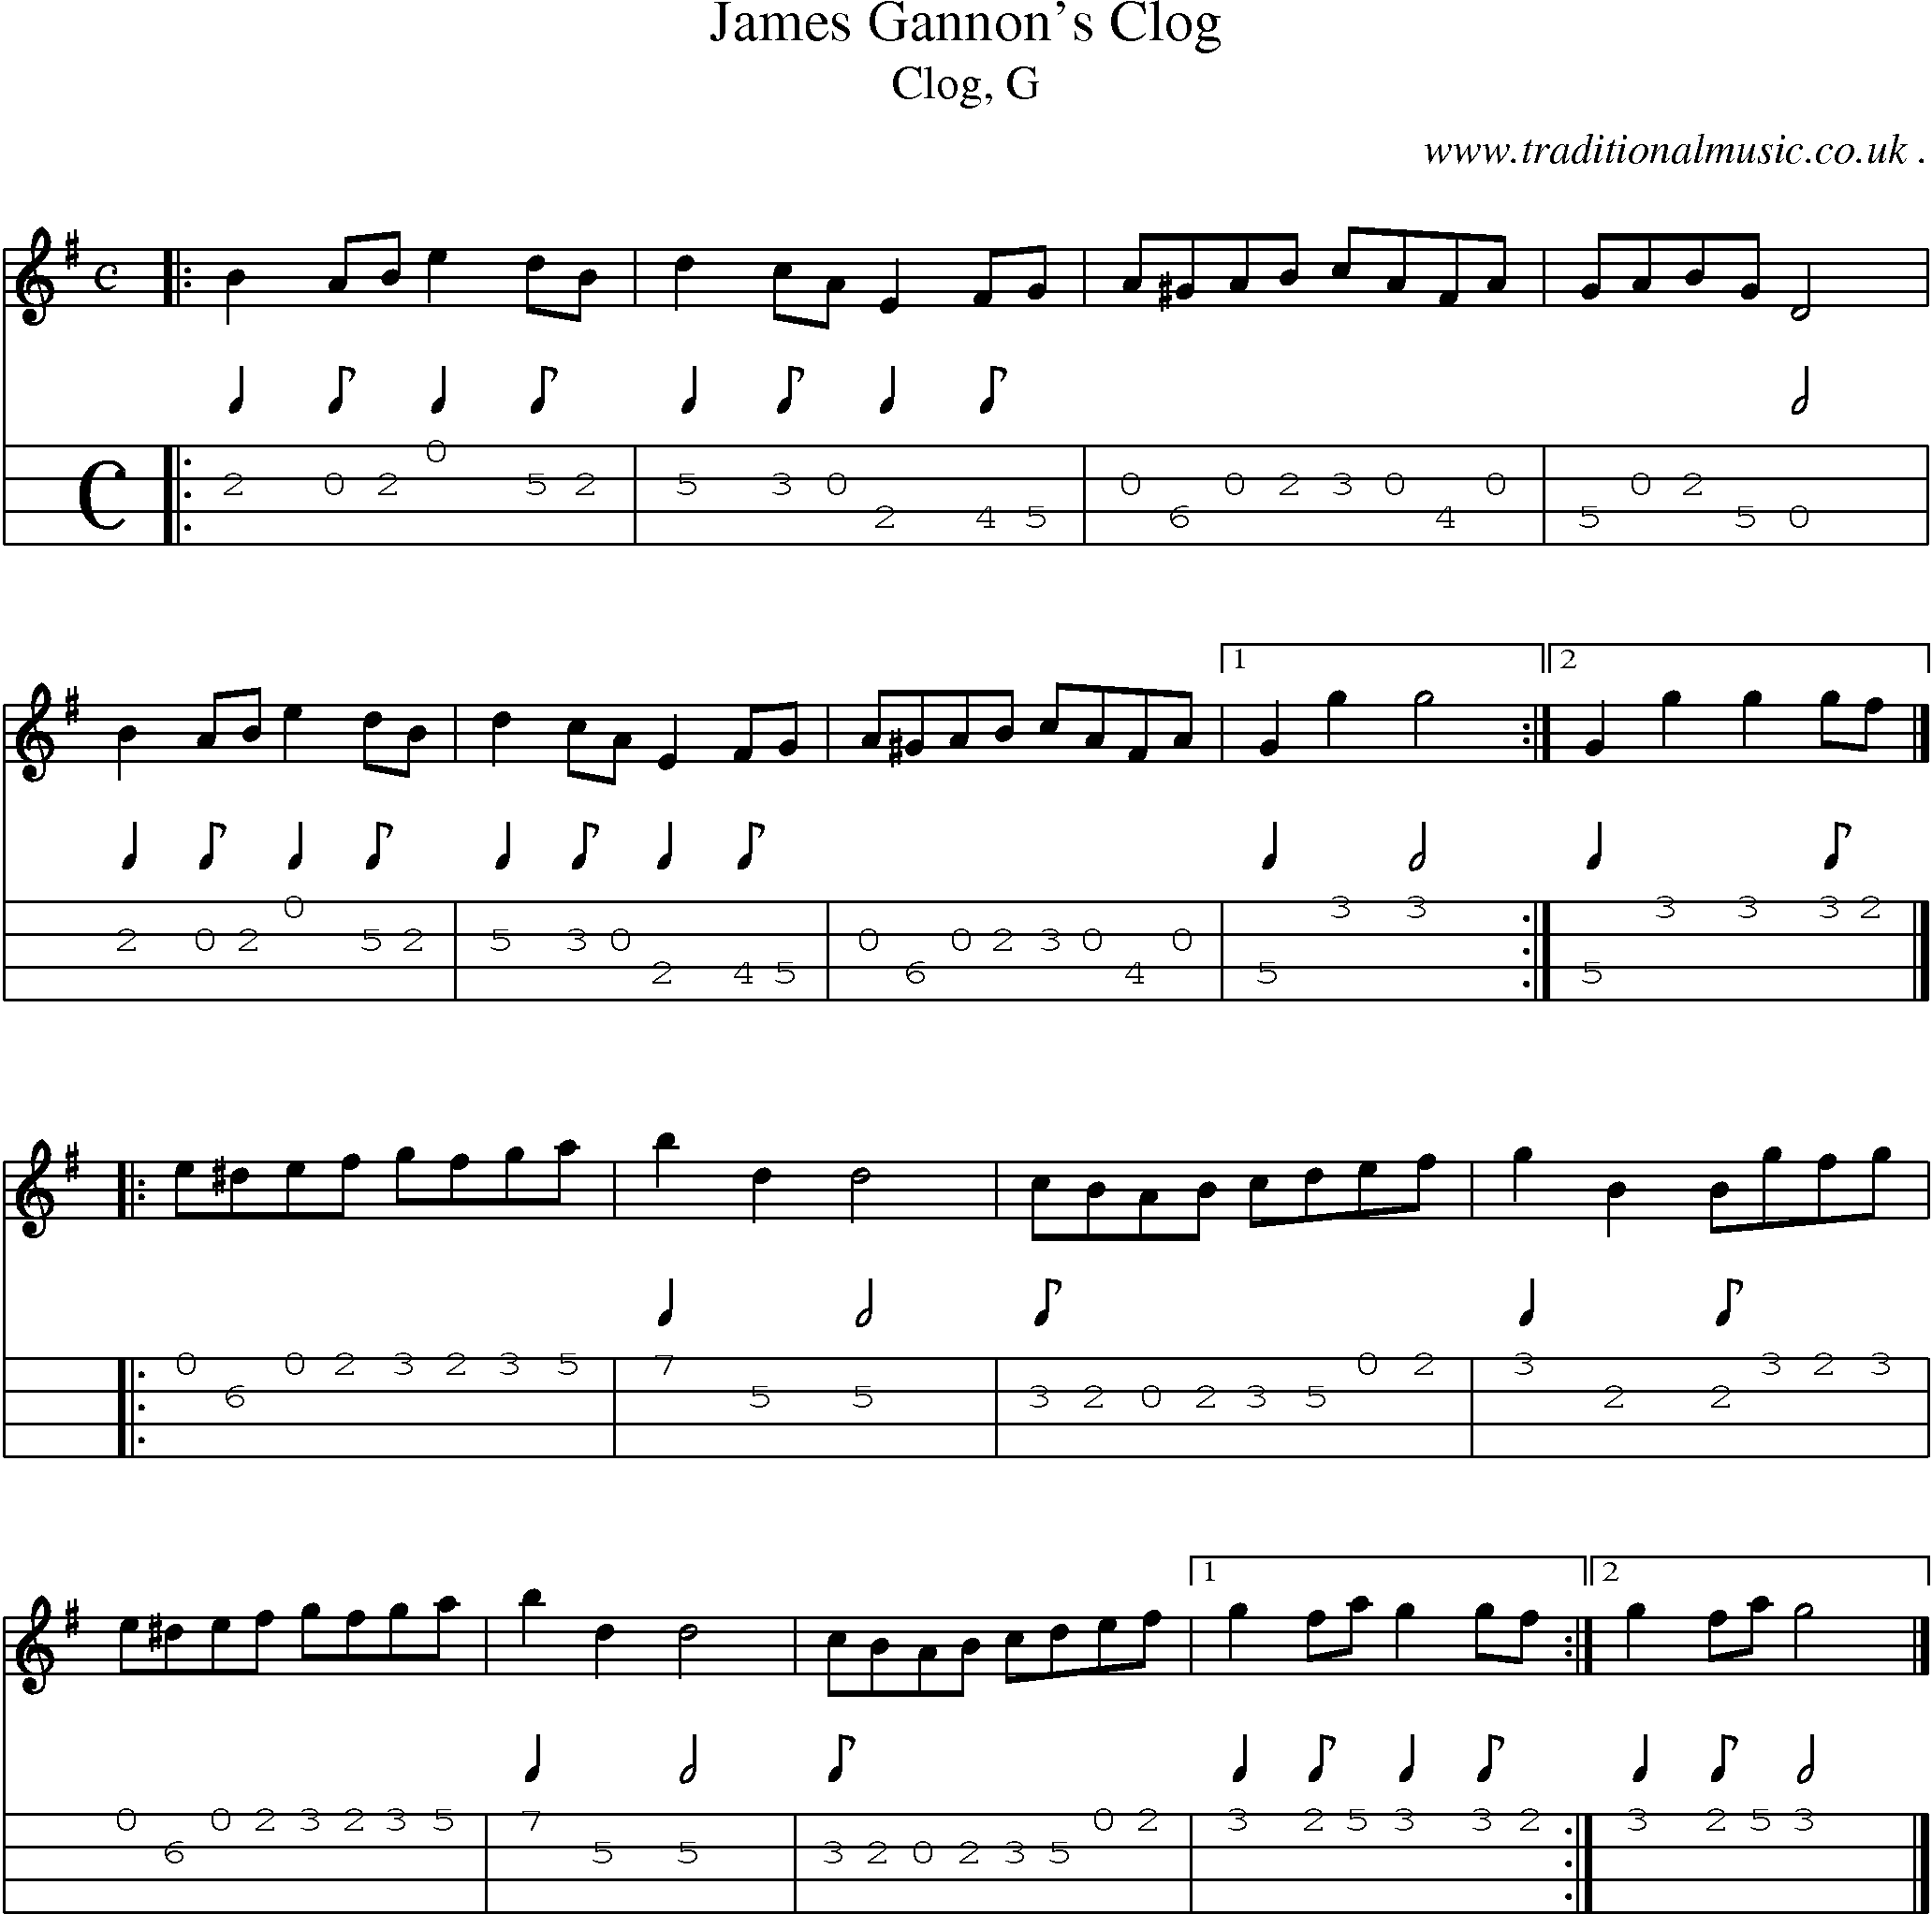 Sheet-music  score, Chords and Mandolin Tabs for James Gannons Clog